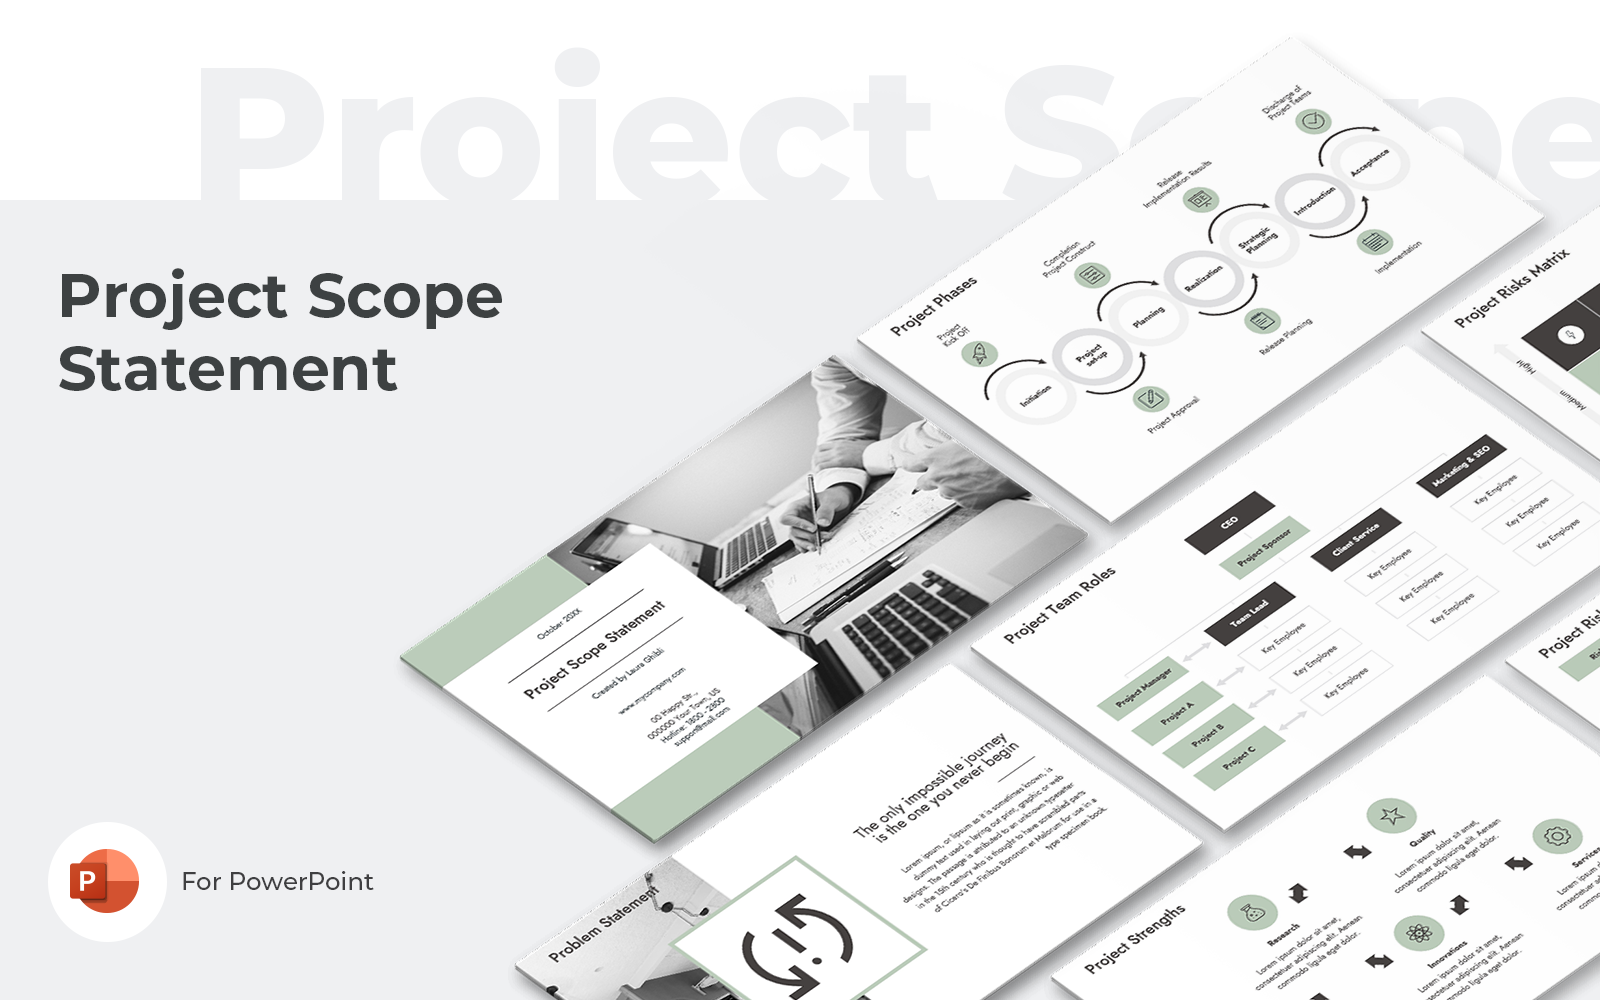 Project Scope Statement PowerPoint Presentation Template